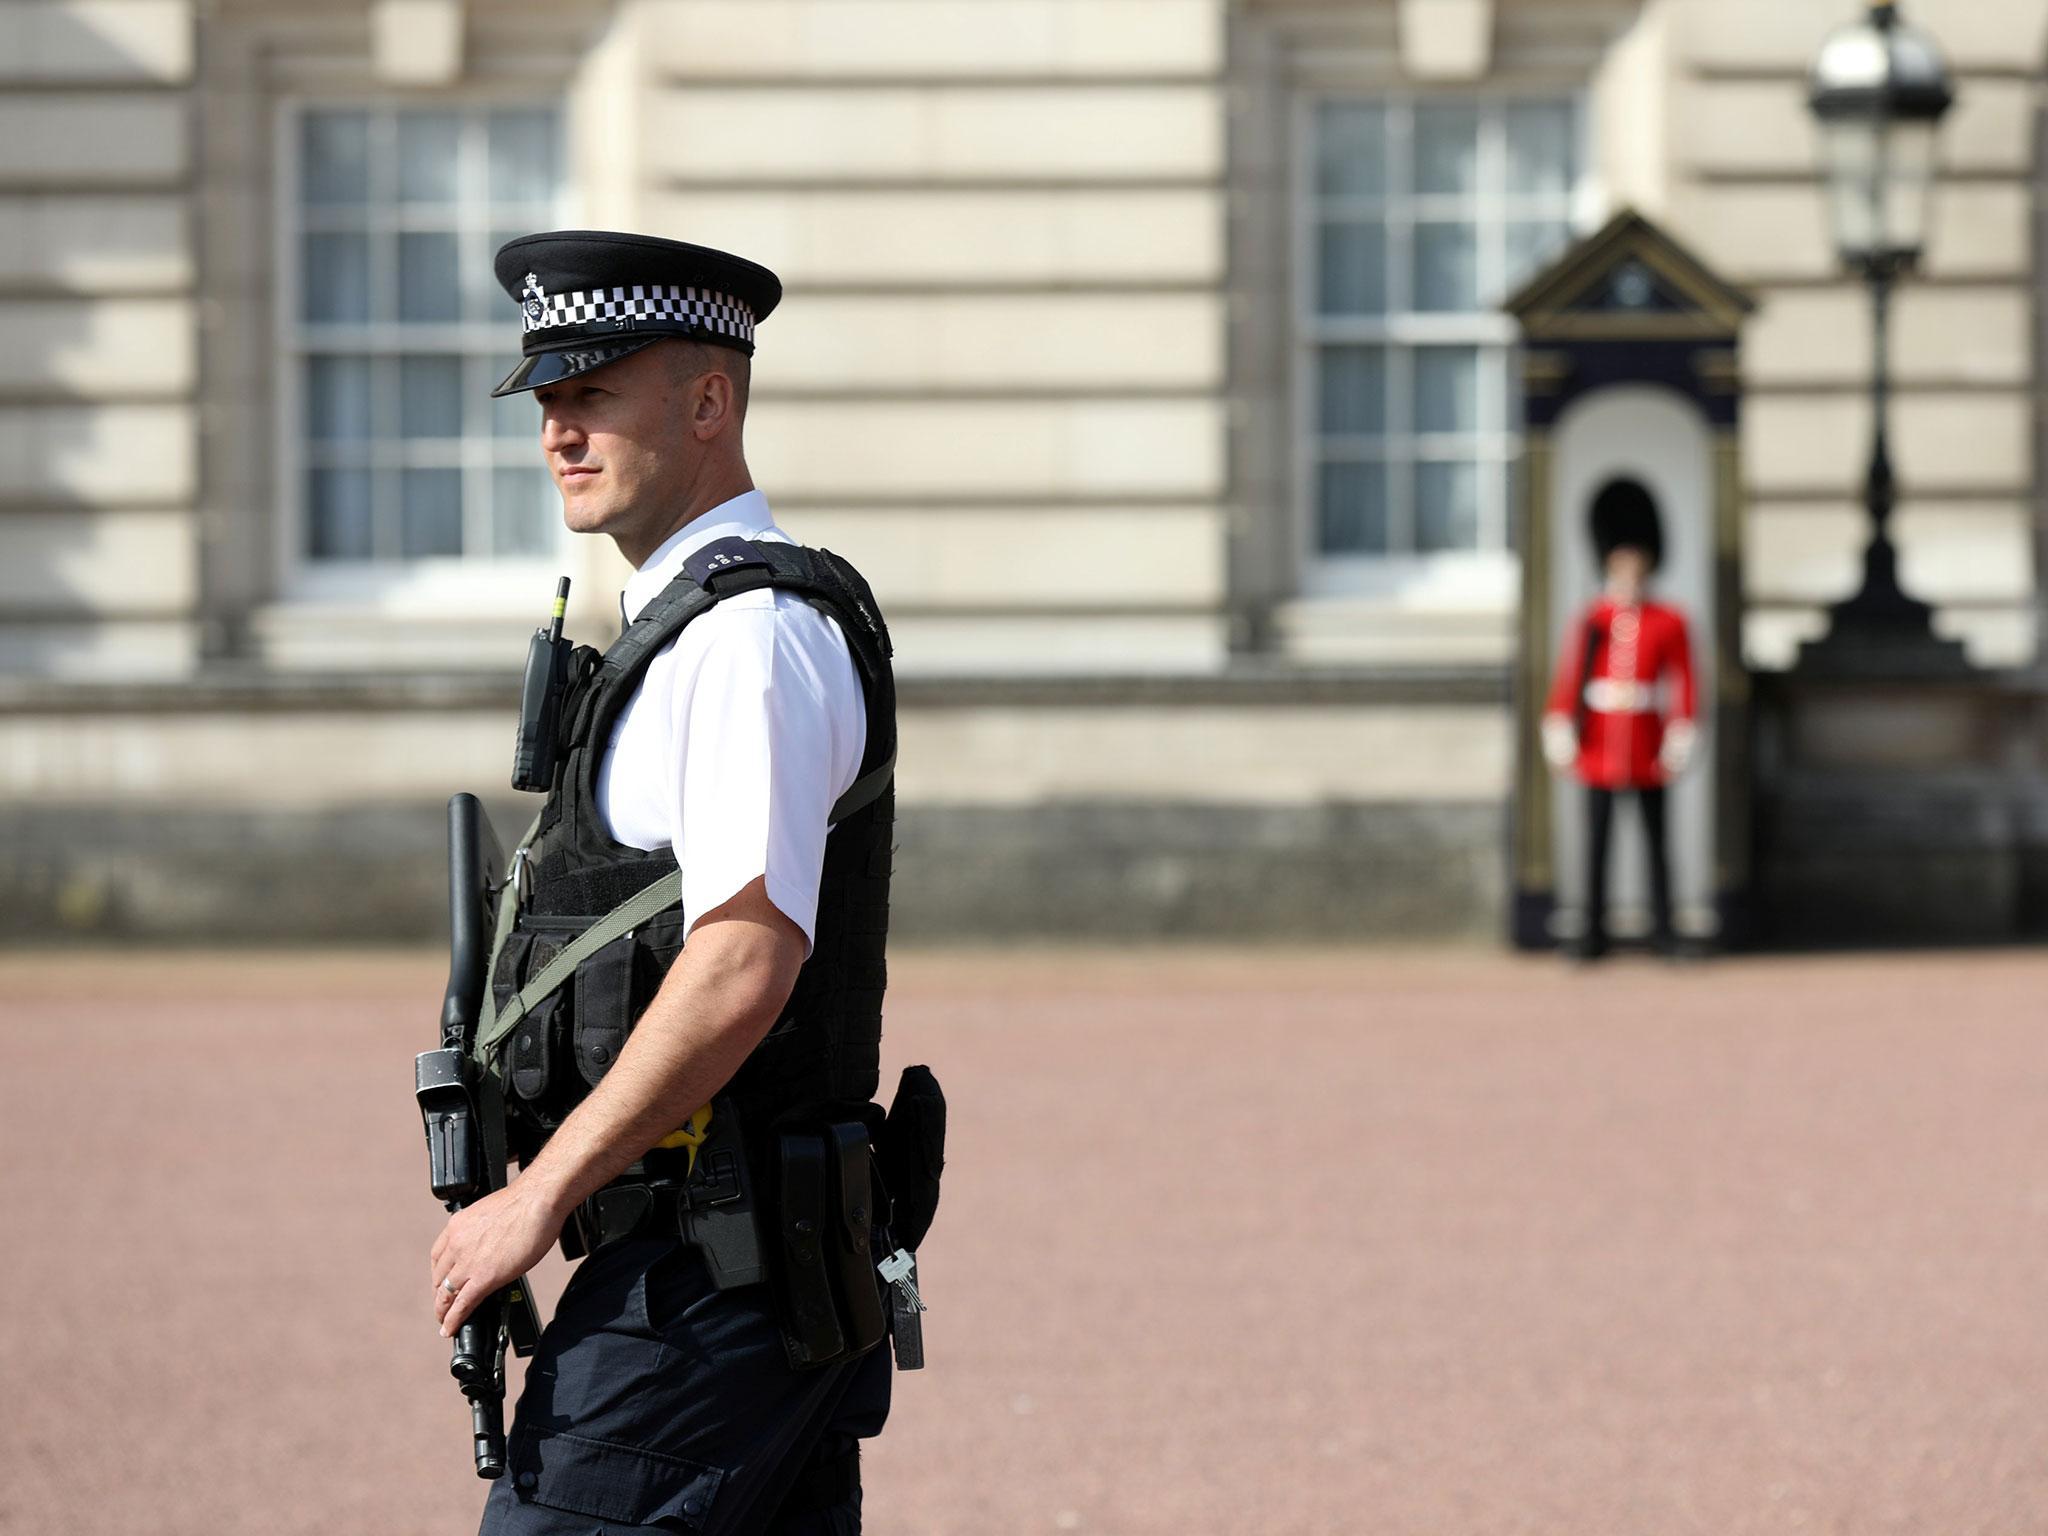 A police officer patrols within the grounds of Buckingham Palace in London